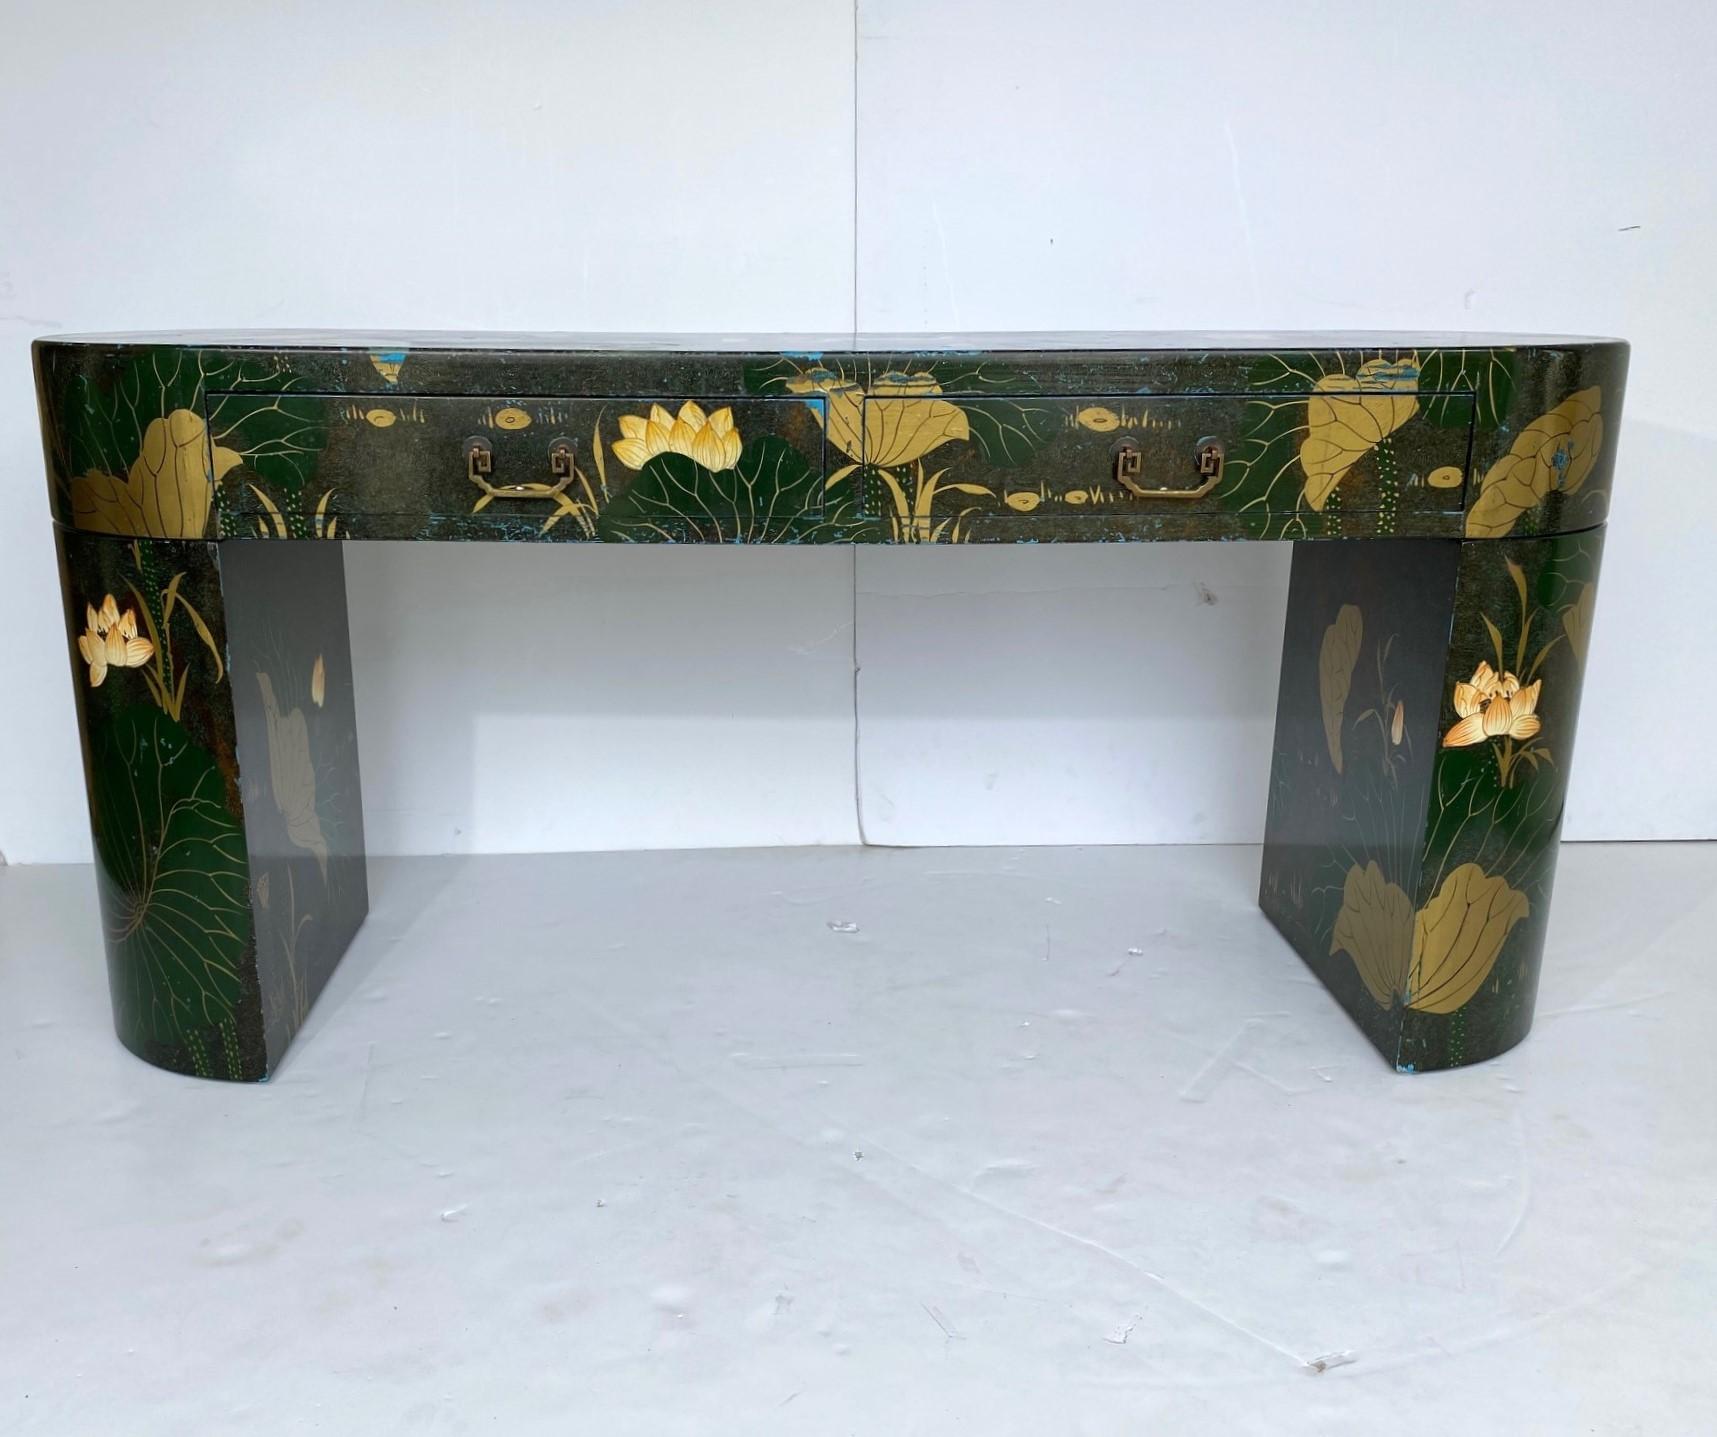 Art Deco Style vanity and stool. The vanity has a pattern of leaves, flowers, and a duck. It has two drawers and a matching stool.